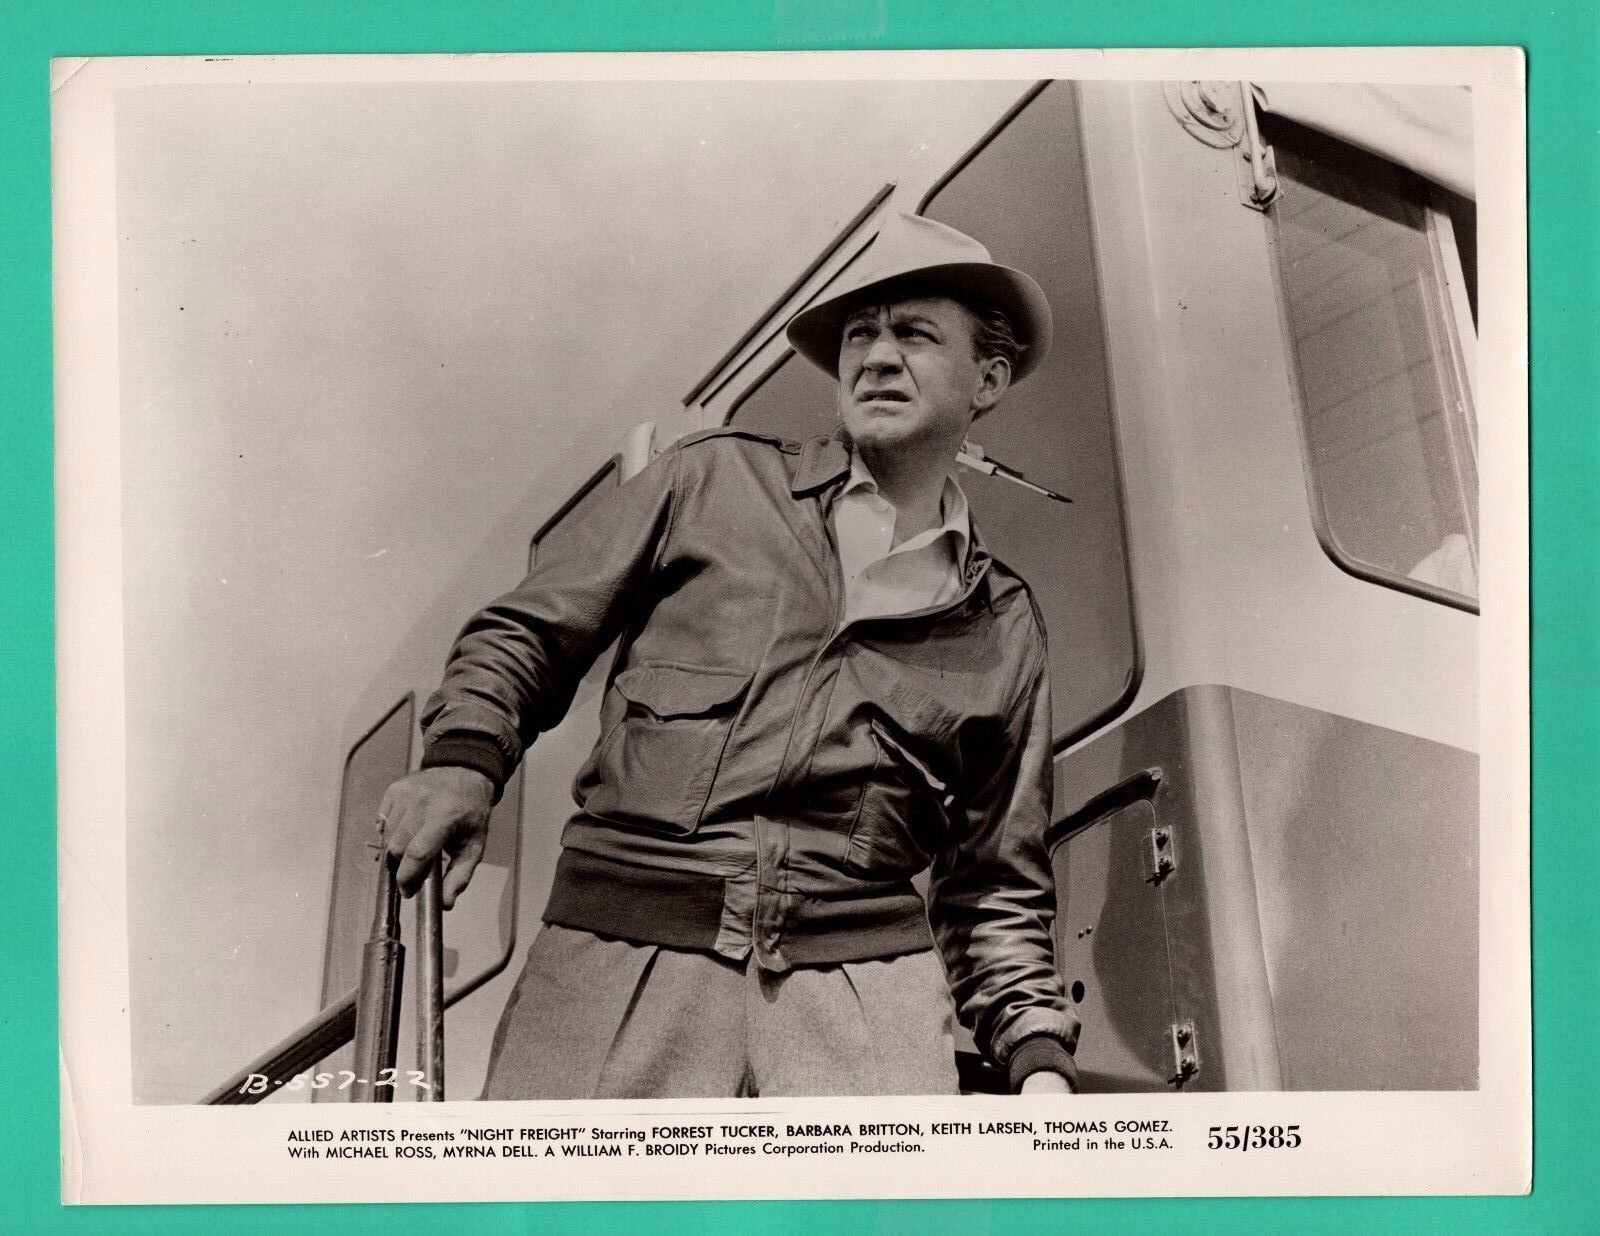 FORREST TUCKER Actor Movie Star Promo Vintage Photo Poster painting 1955 NIGHT FREIGHT 8x10